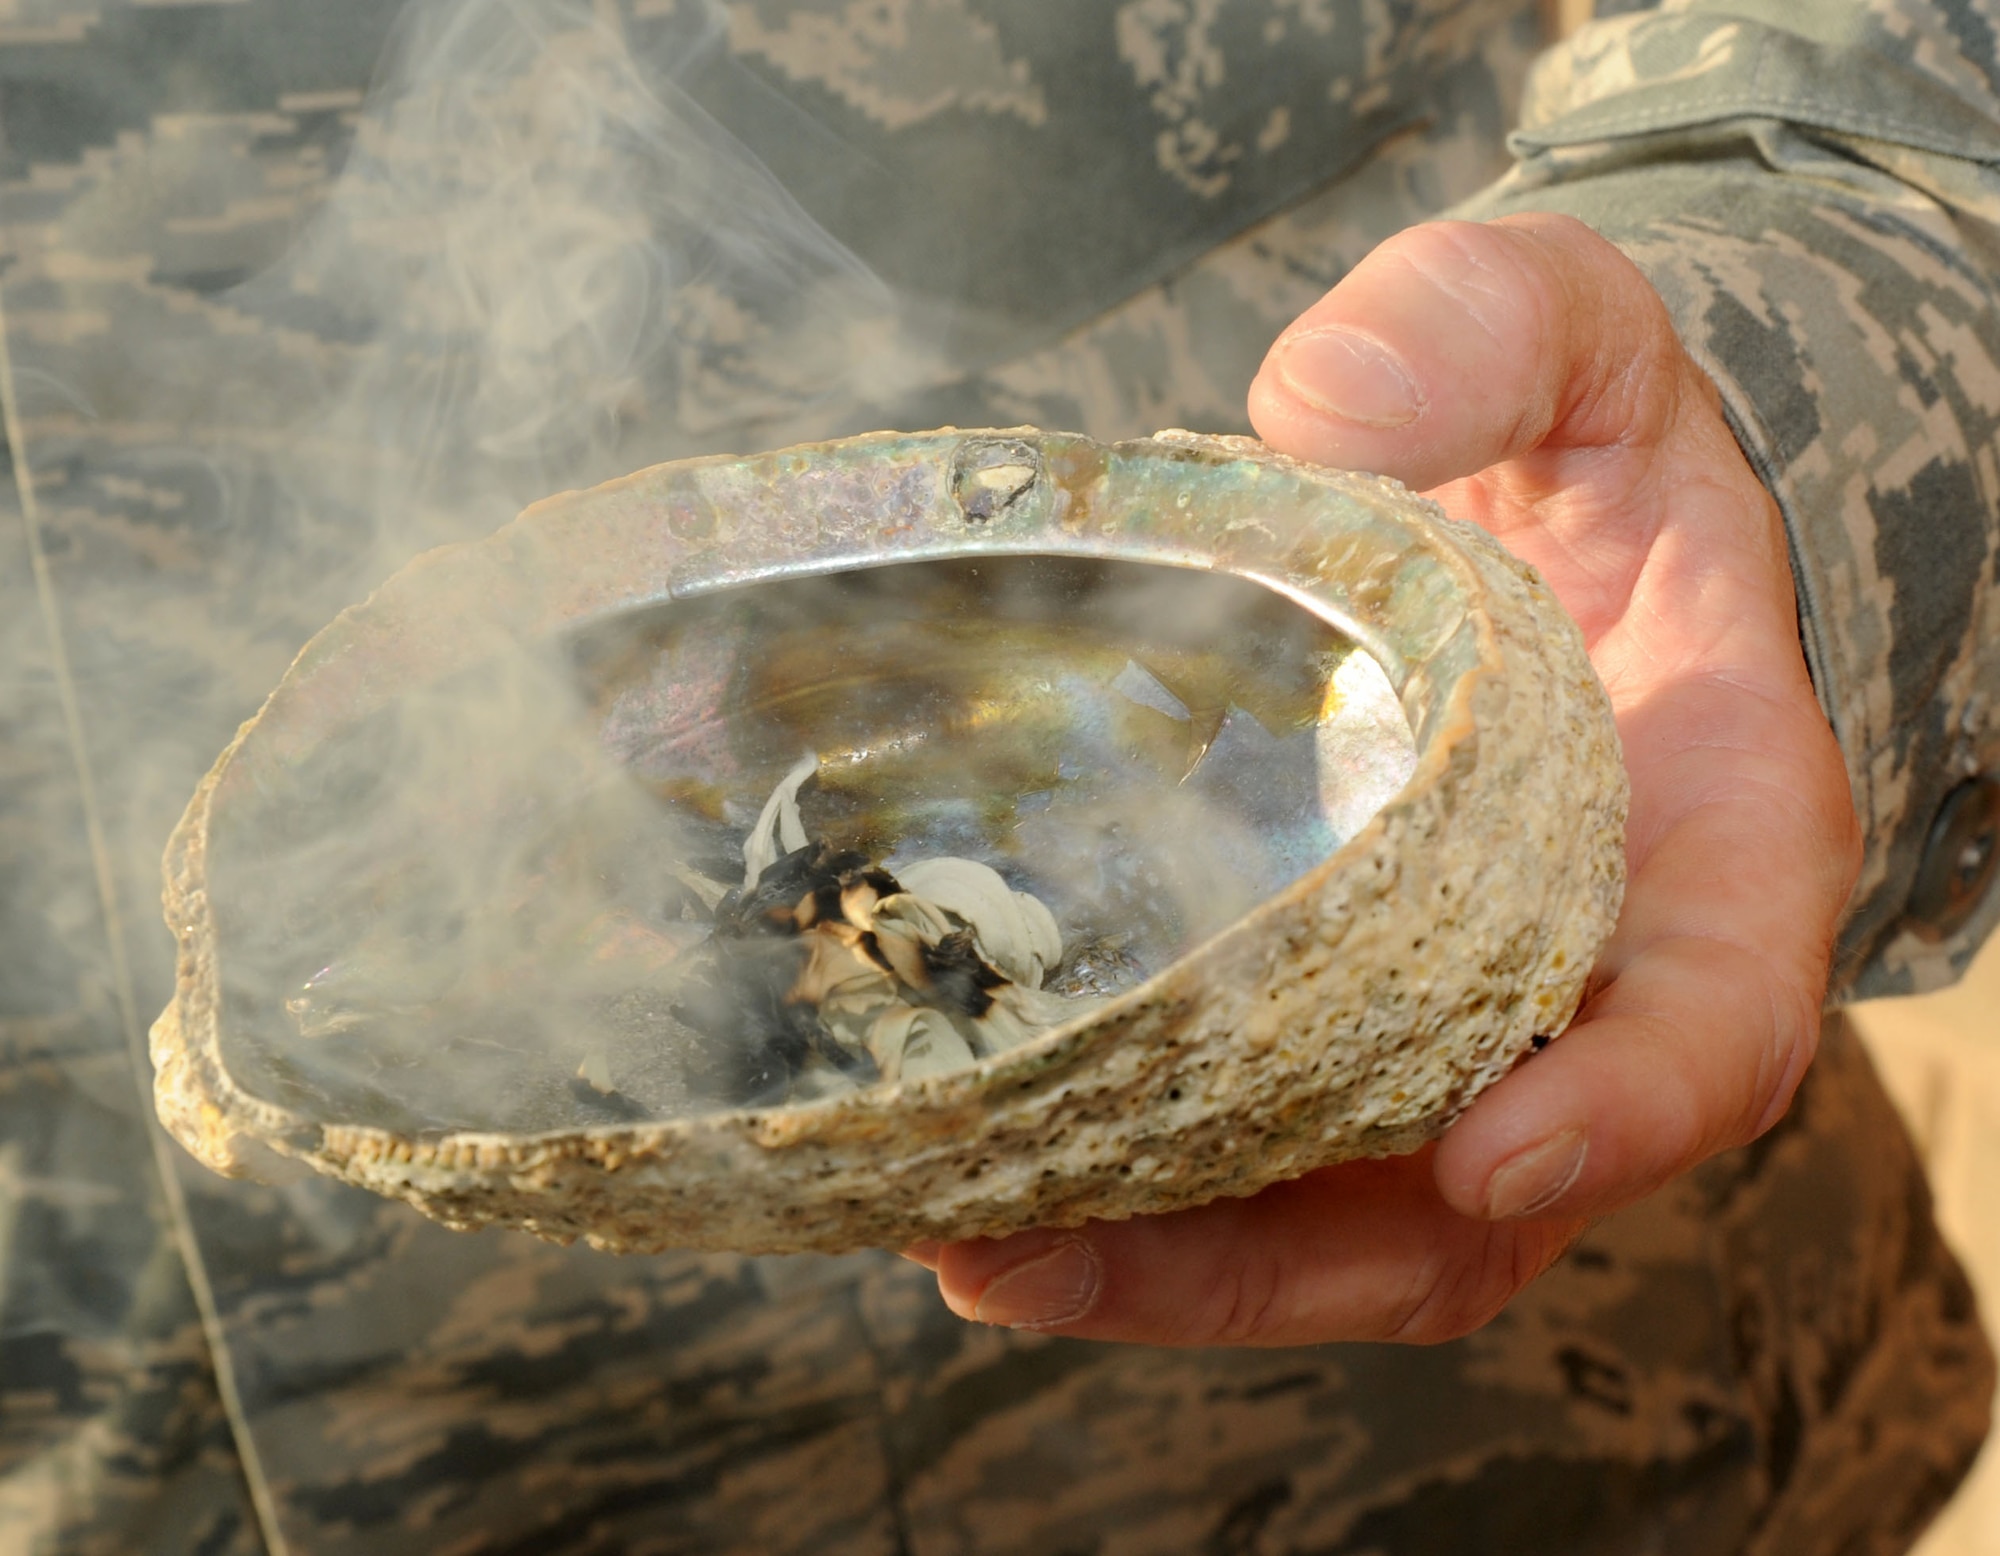 Sage smoke wafts from a ceremonial bowl during the 386th Air Expeditionary Wing’s Native American Heritage Month observance ceremony here Nov. 5, 2014. This year’s Native American Heritage Month theme is, “Native Pride and Spirit: Yesterday, Today and Forever,” and the observance promotes the value of Native American ancestry and traditions. (U.S. Air Force photo by Master Sgt. Eric Petosky/released)